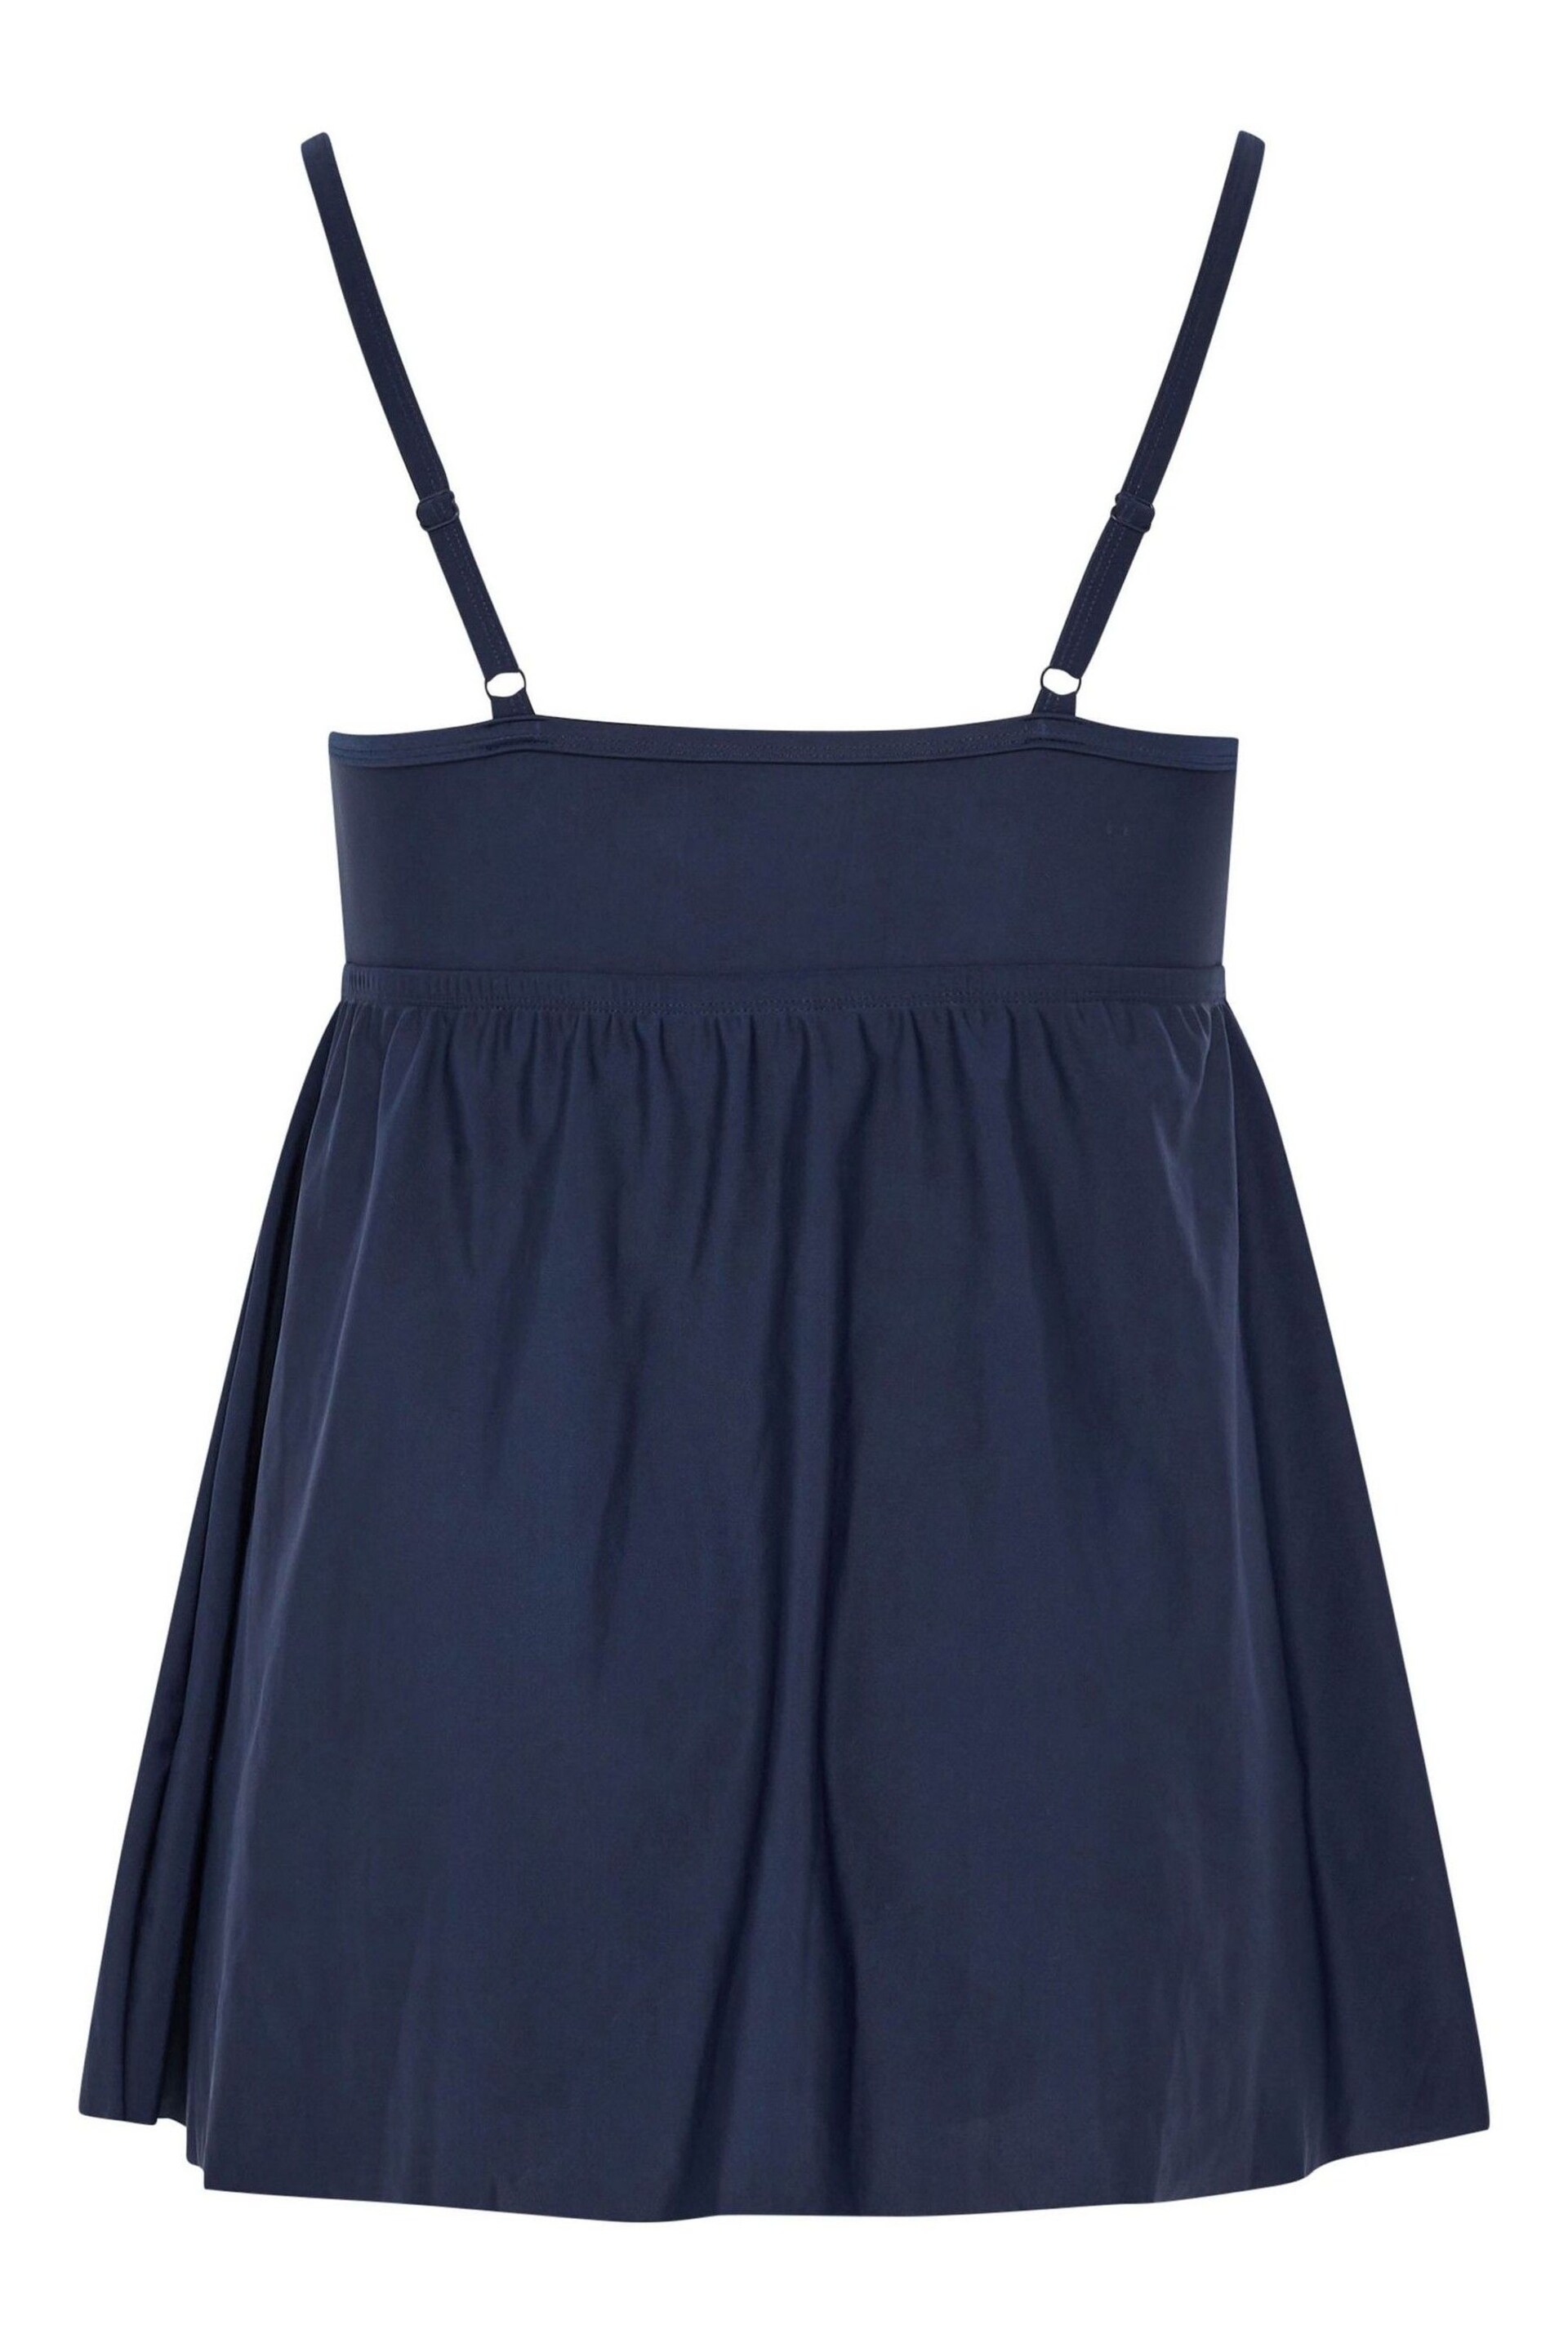 Yours Curve Blue Everyday Swimdress - Image 6 of 6